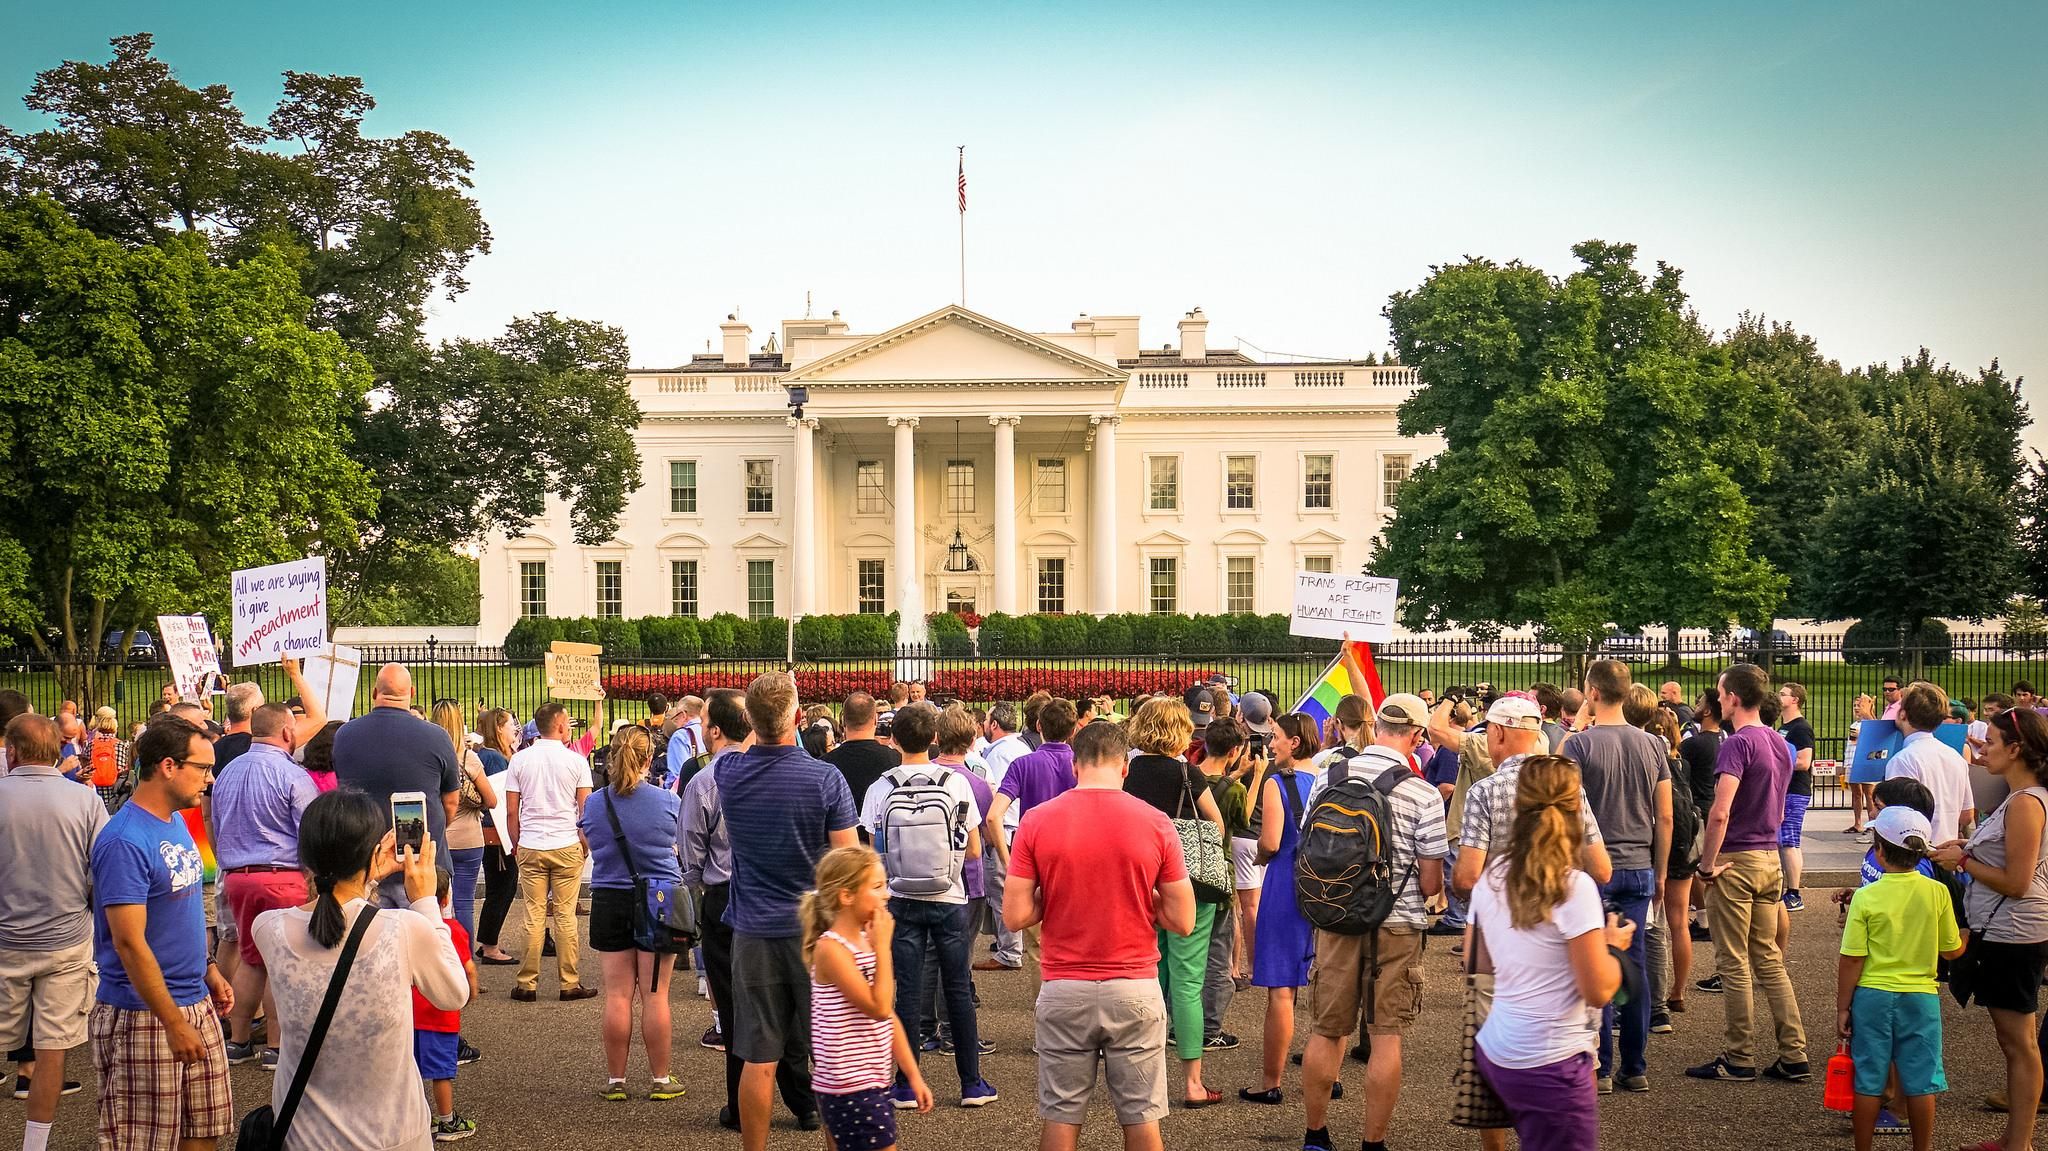 Protesters have frequently gathered outside the White House in recent months, 